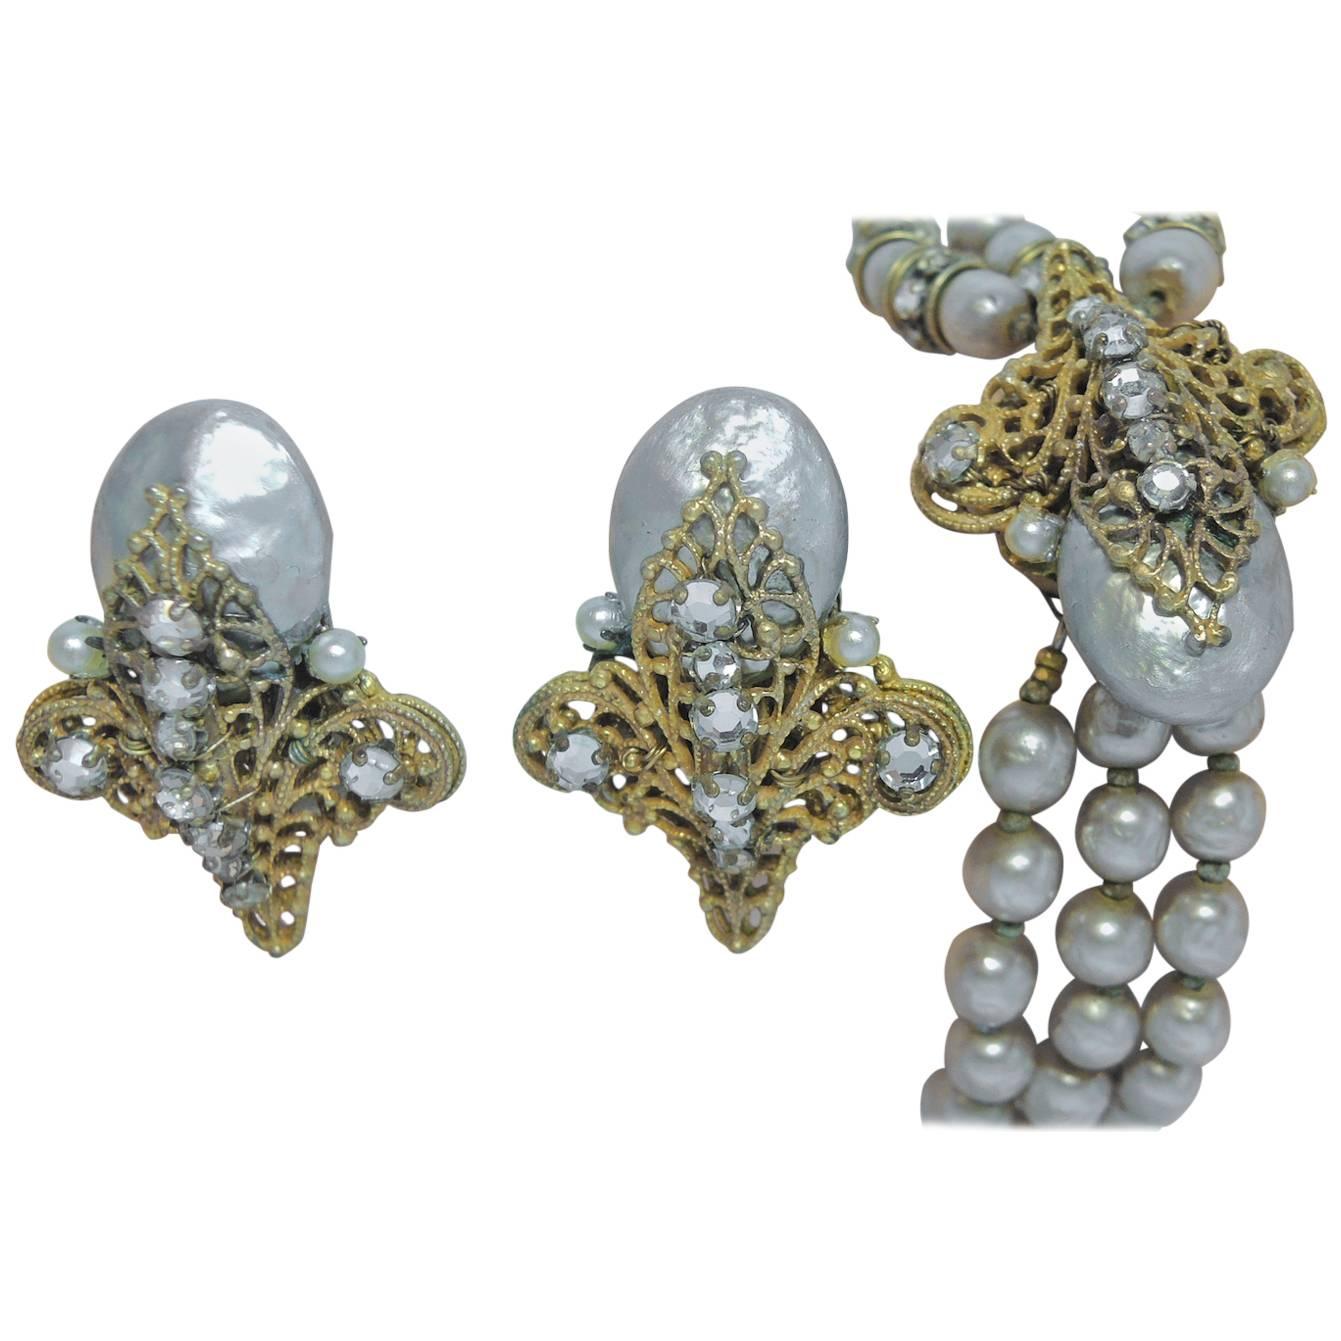 Miriam Haskell Vintage Three Strand Faux Pearl Bracelet and Earrings Set